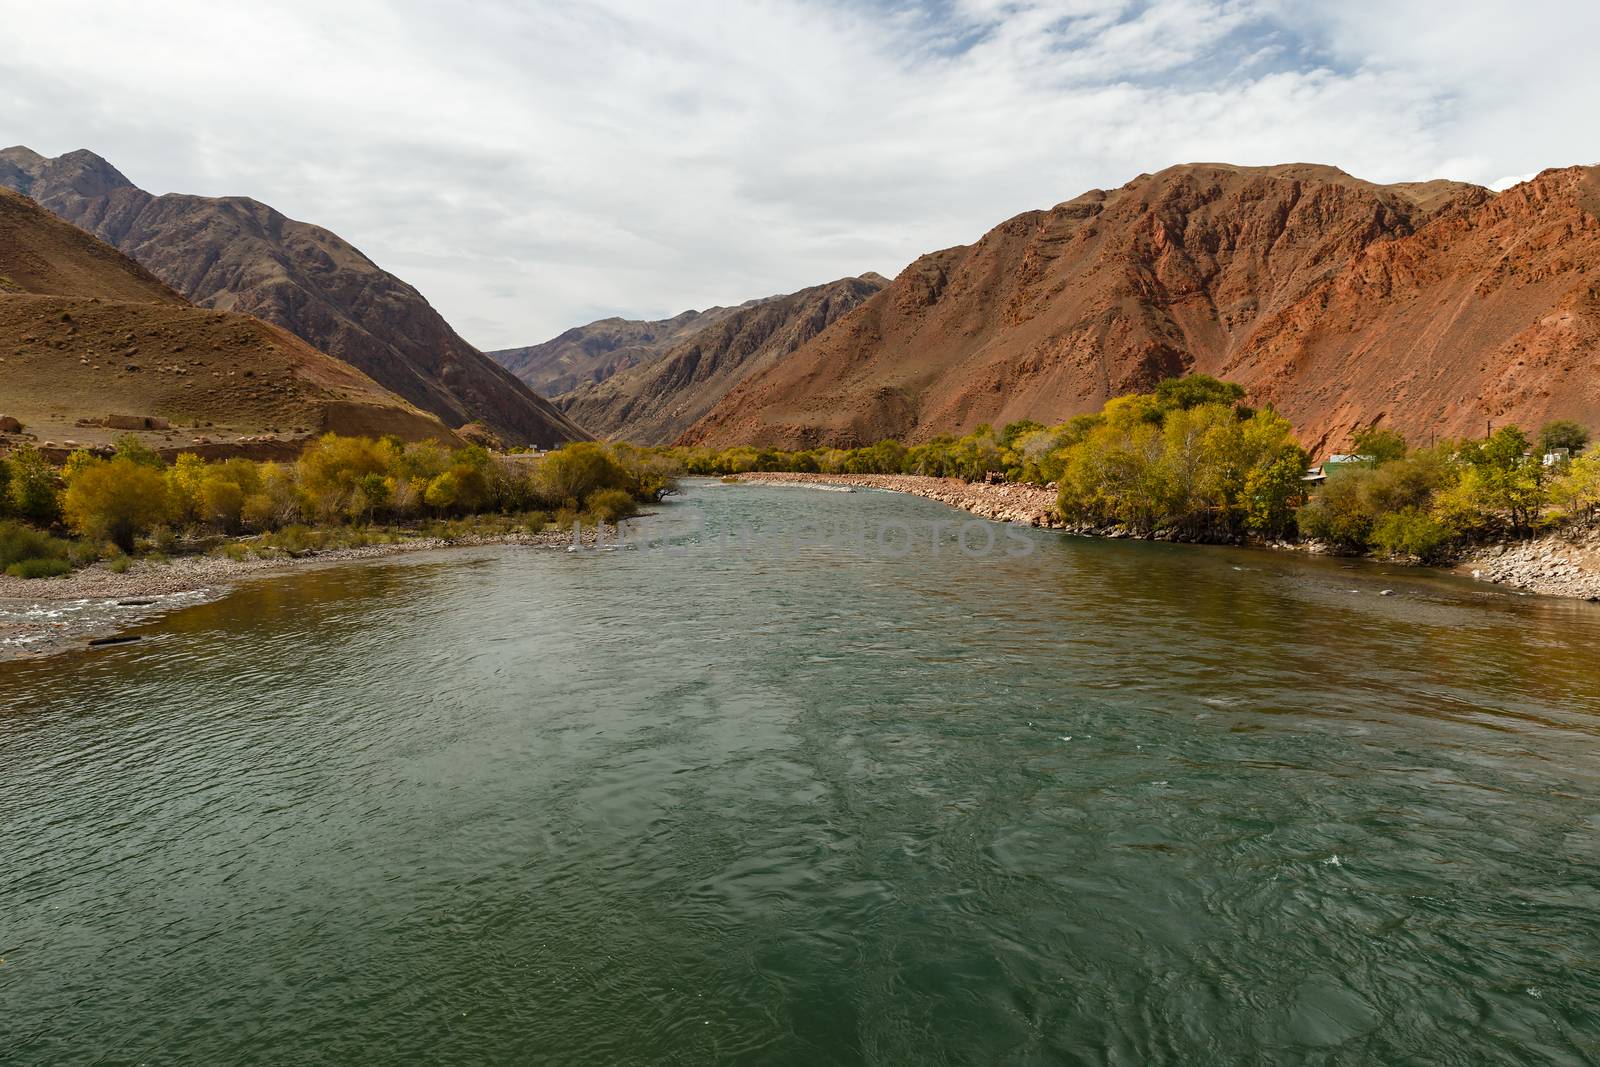 Kokemeren river, Aral, Jumgal District, Naryn Region, Kyrgyzstan, mountain river in the gorge